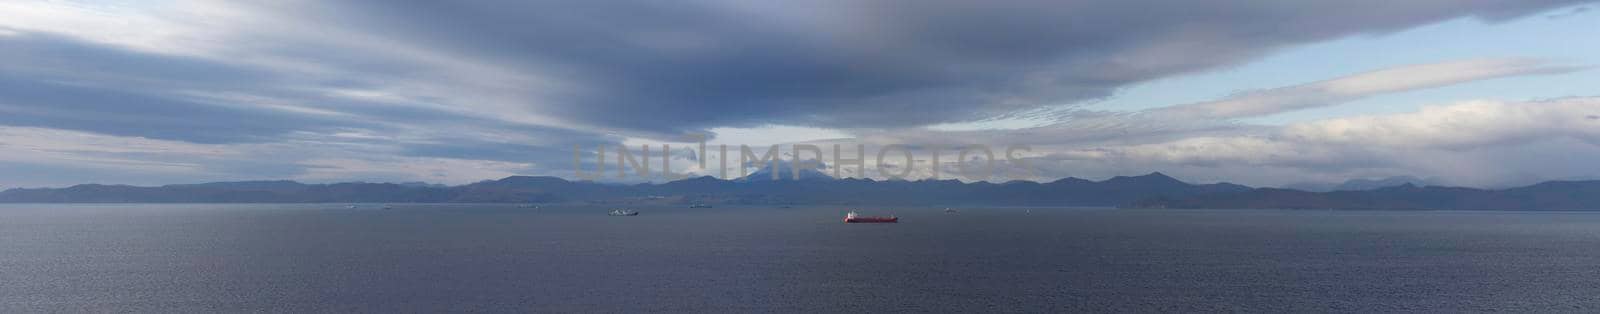 Panorama of Avacha Bay with a view of the volcano Viluchinsky. by Vvicca